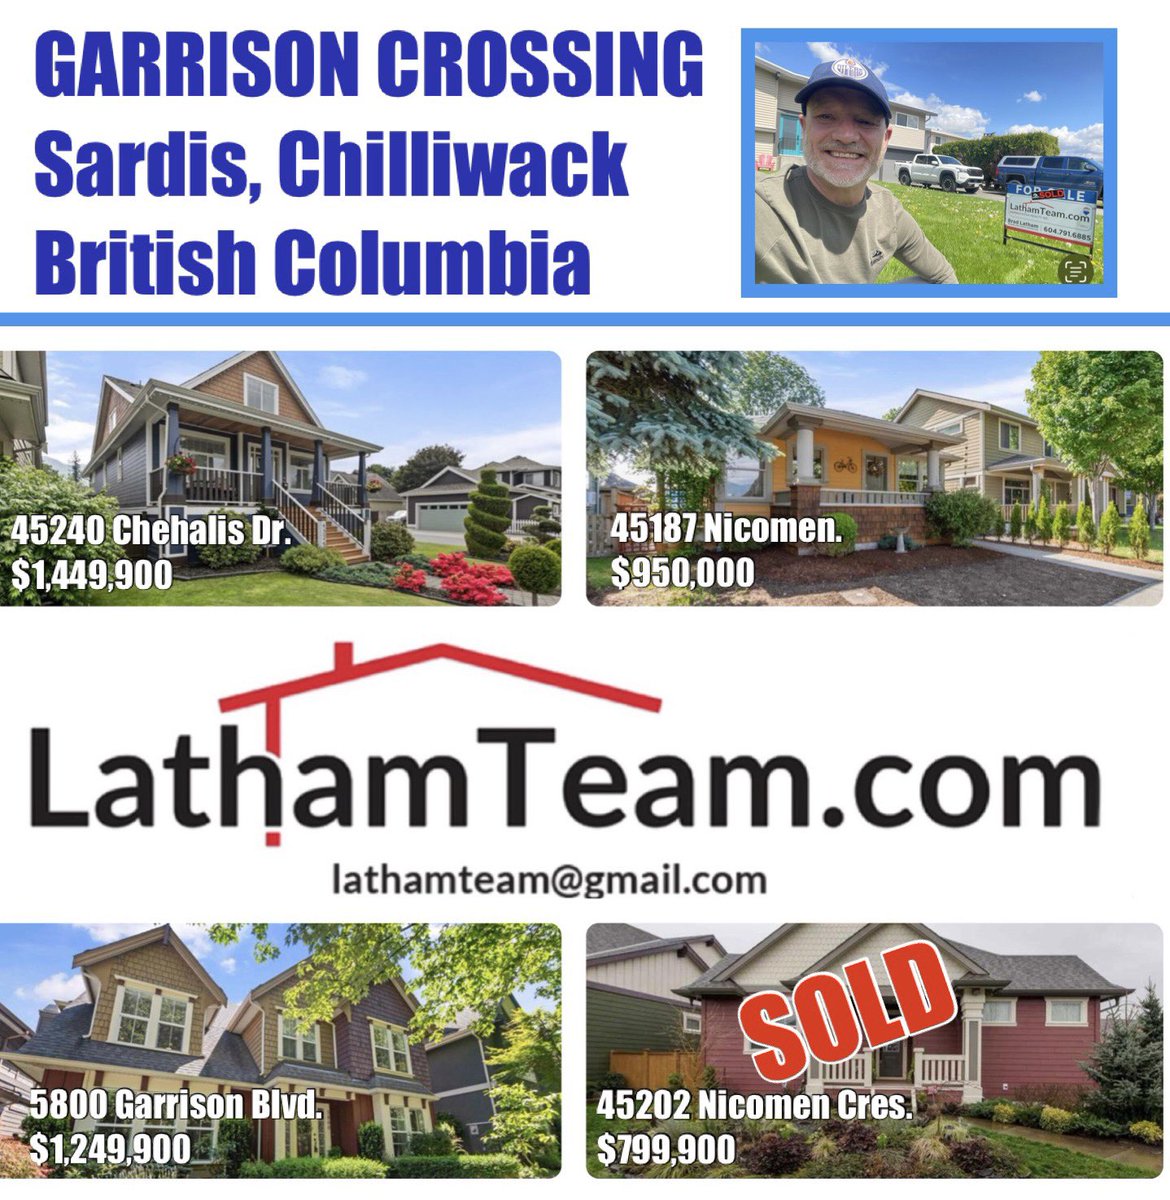 One of the nicest communities in Chilliwack. Come and check out the amenities, shopping and green spaces in this family friendly and very well planned community. 😀👍 #bradlatham #stevelatham #brucefournier #openhouse #chilliwackbc #remax #remaxchilliwack #garrison